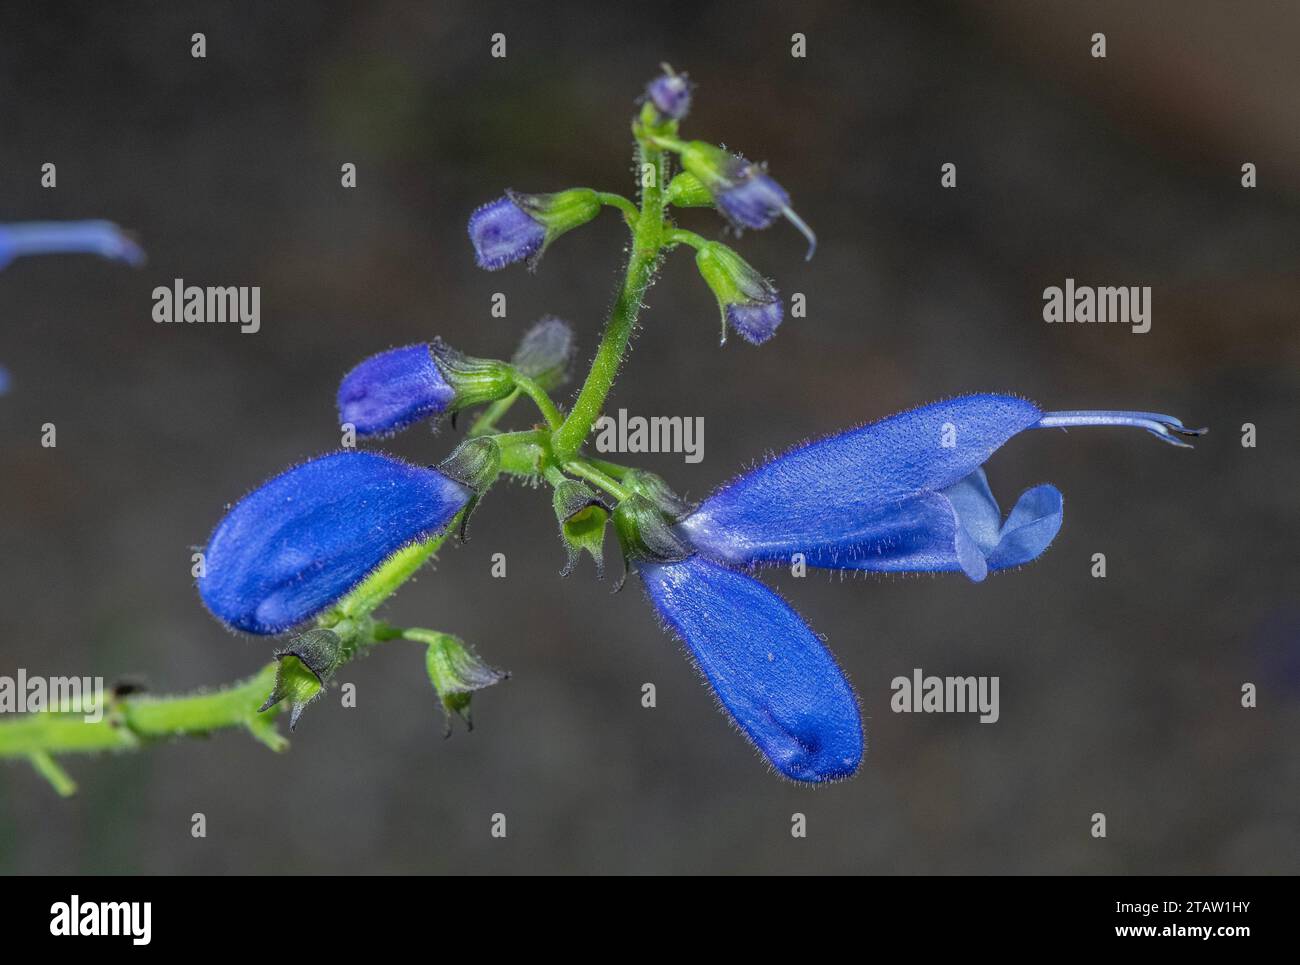 Guatemalan sage, Salvia cacaliifolia, in flower, from Mexico and Central America. Stock Photo